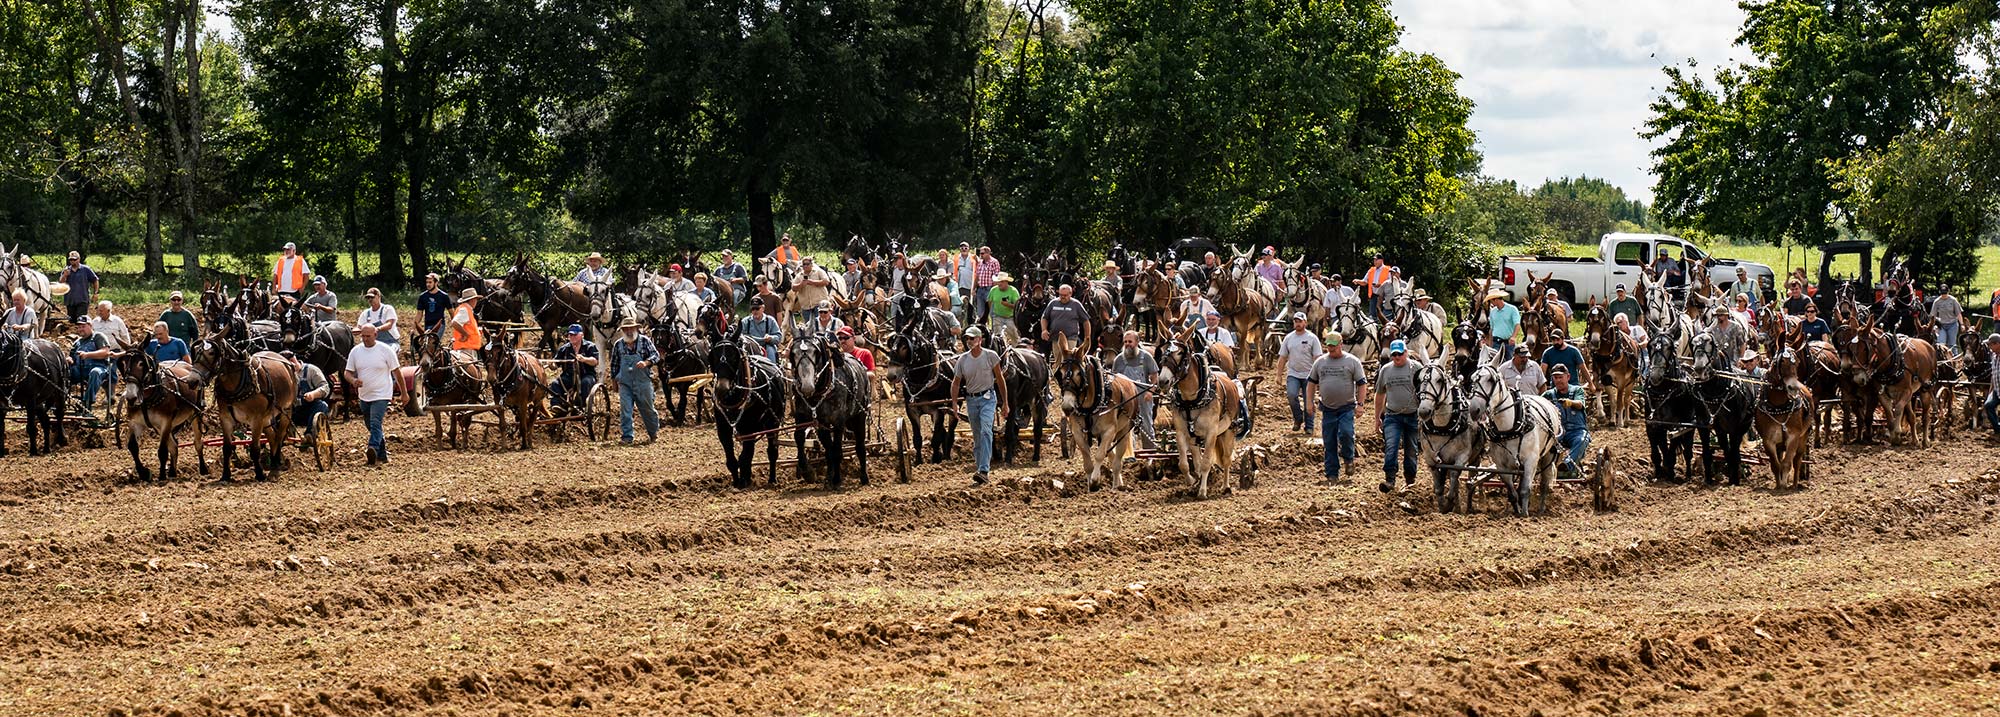 Guinness World Record Mule Plow 09/28/18